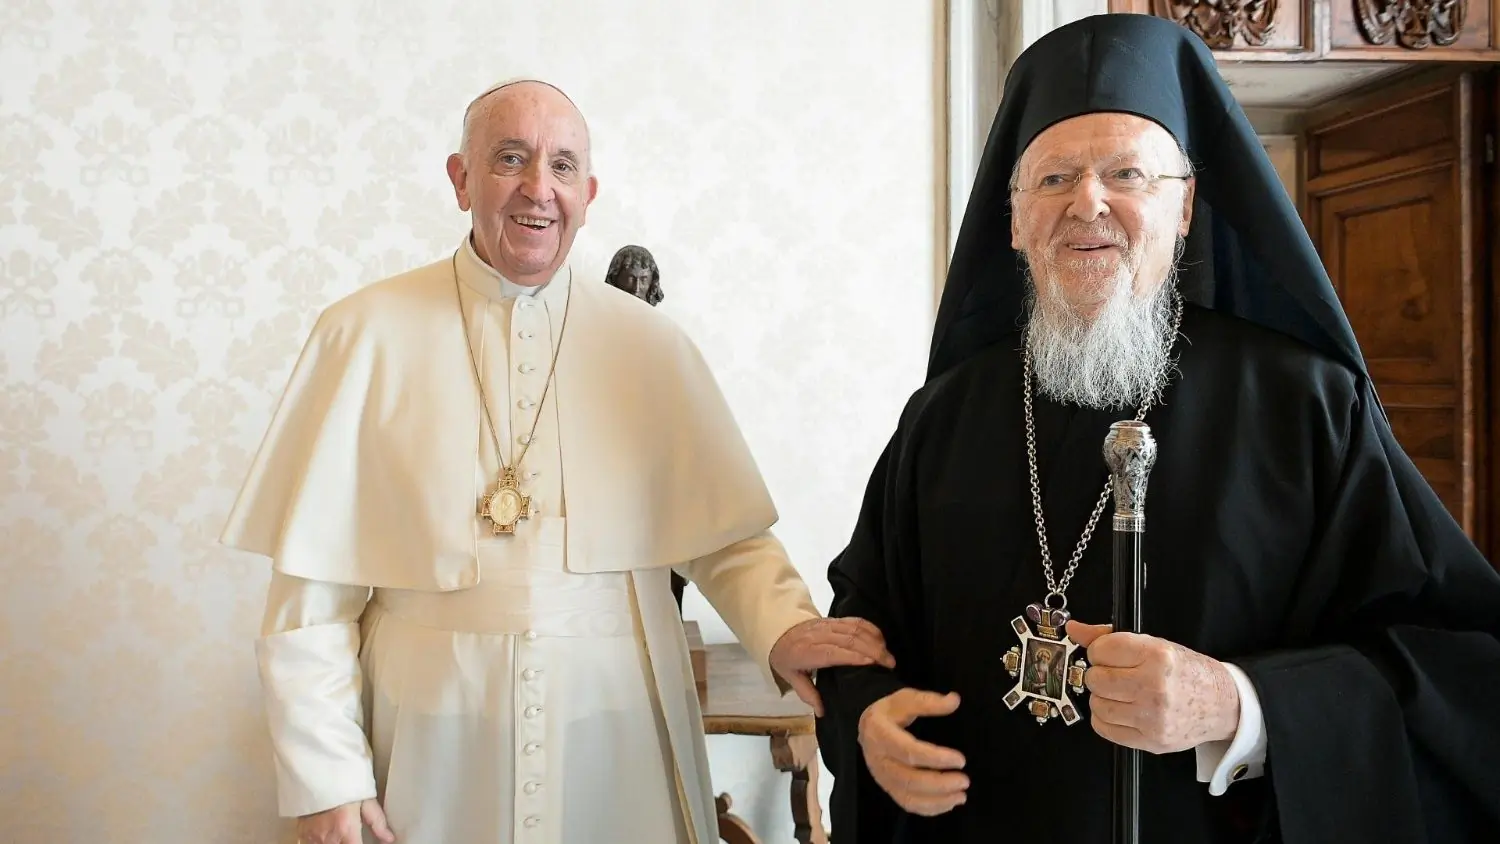 Patriarch Bartholomew I of Constantinople meets with Pope Francis at the Vatican